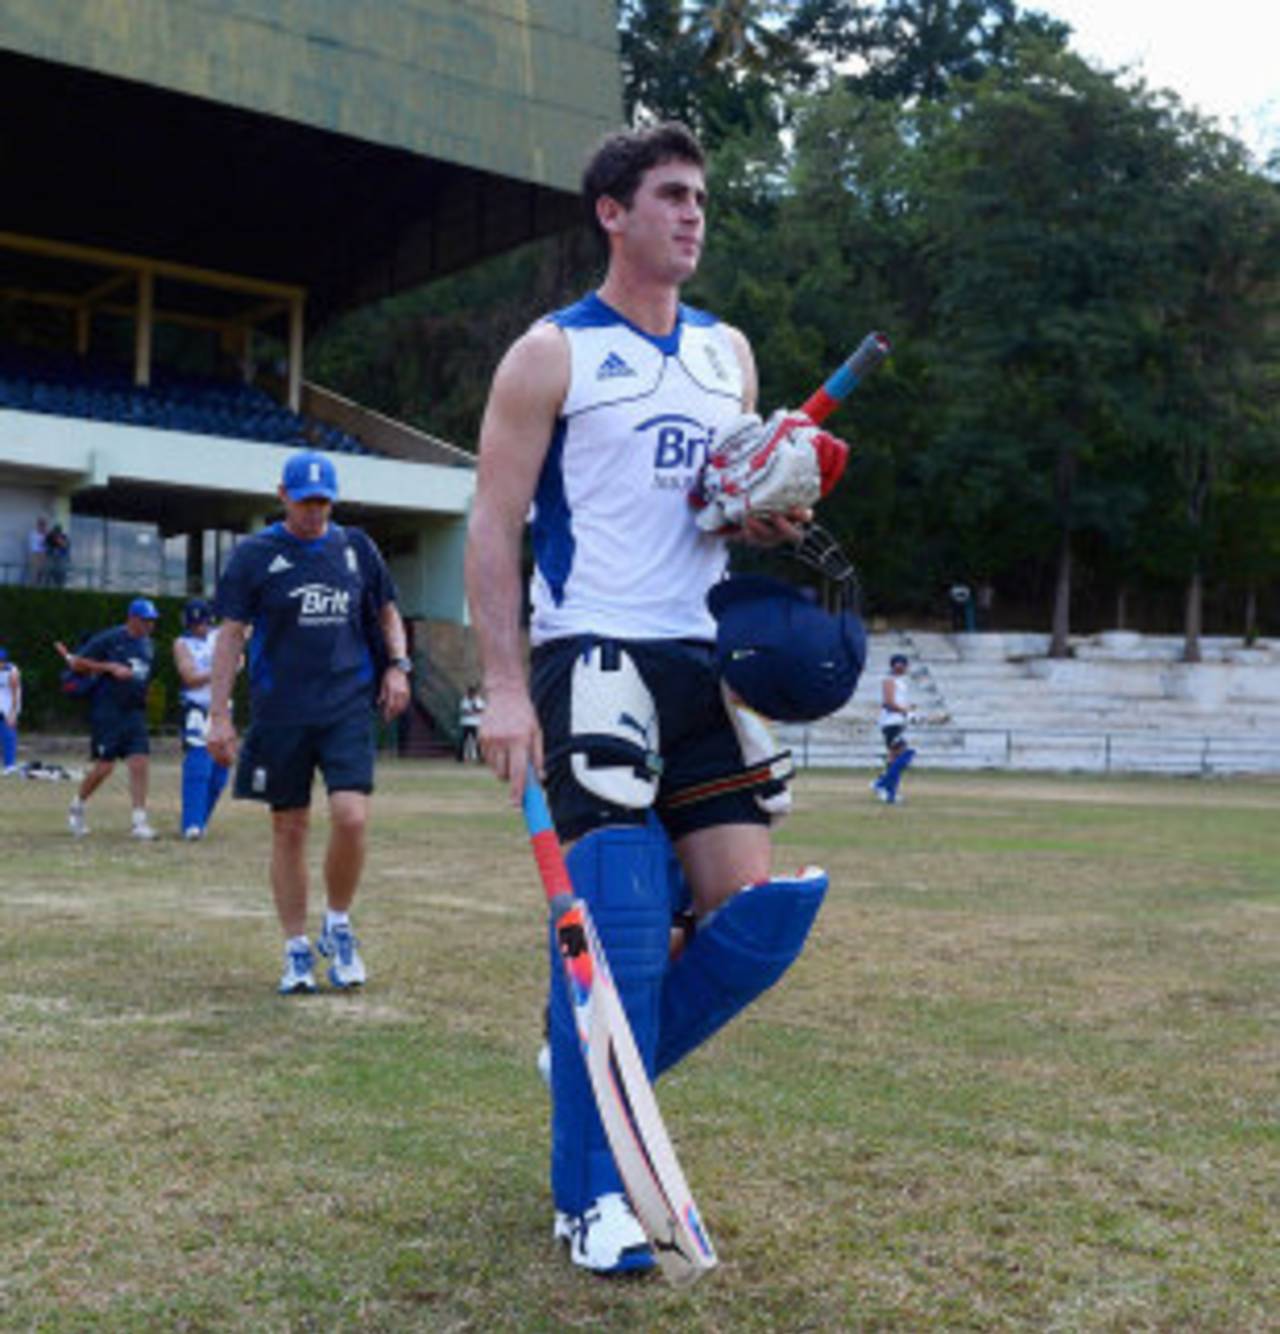 Craig Kieswetter has become the latest wicketkeeper to be discarded by England&nbsp;&nbsp;&bull;&nbsp;&nbsp;Getty Images